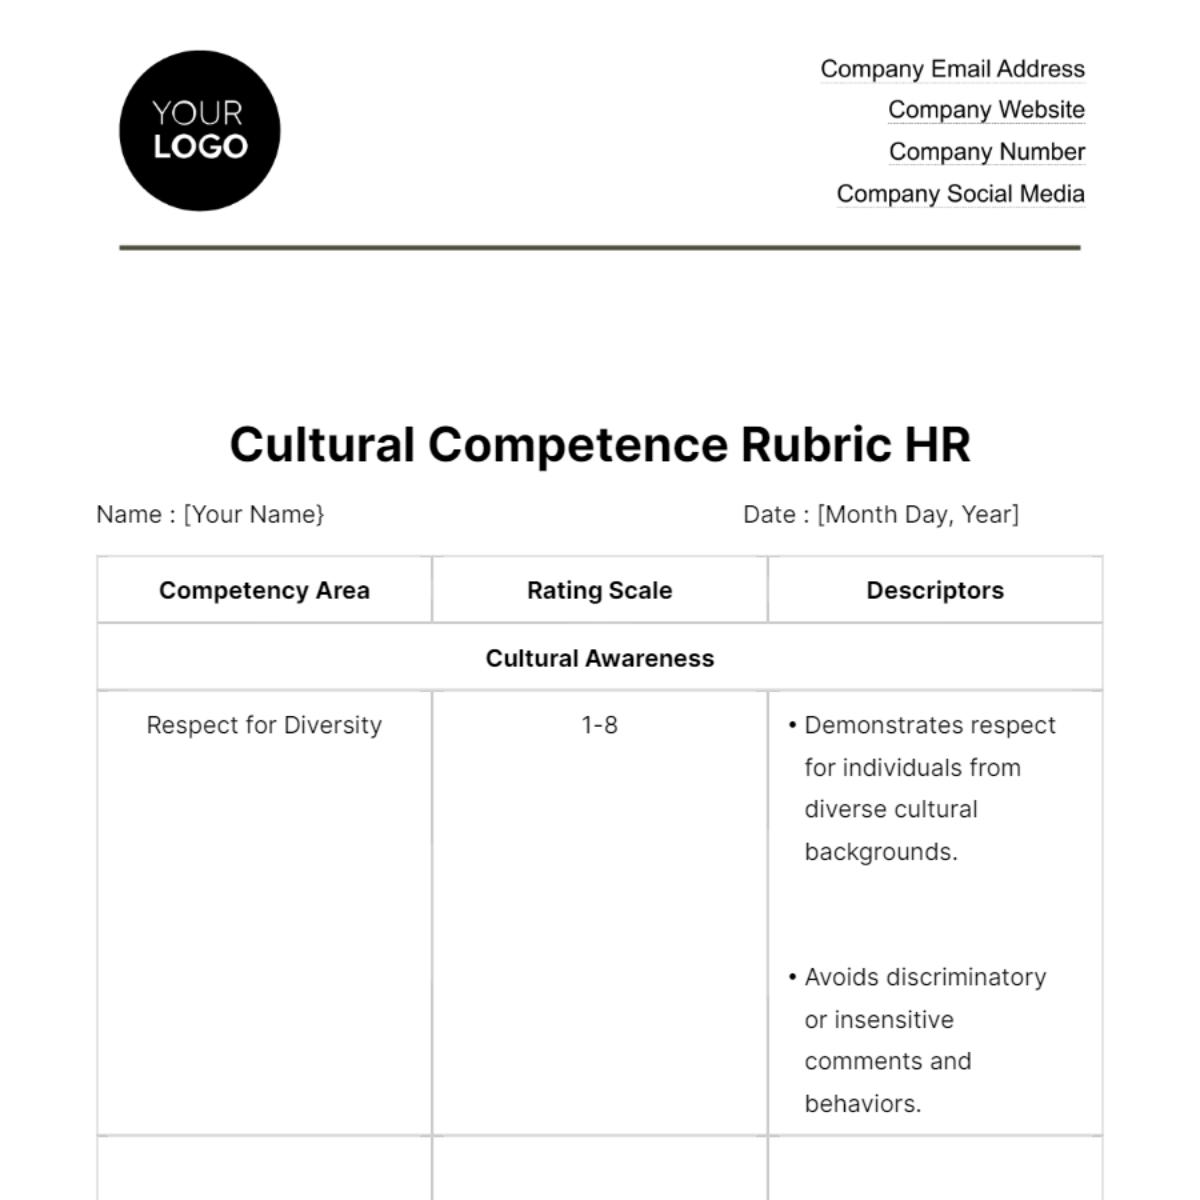 Free Cultural Competence Rubric HR Template